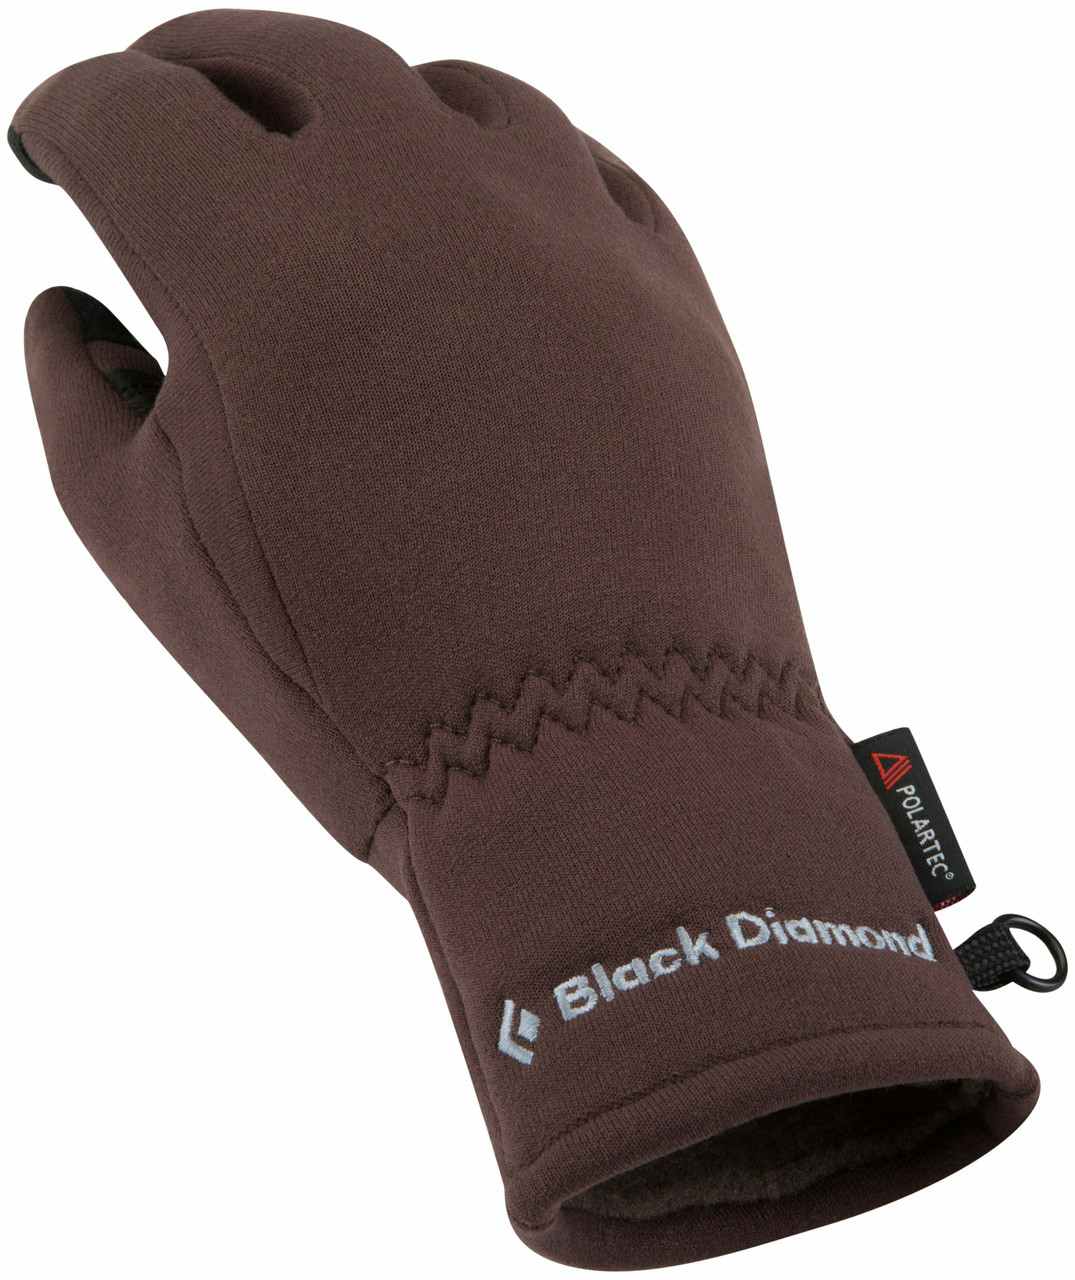 Midweight Digital Liner Gloves French Roast